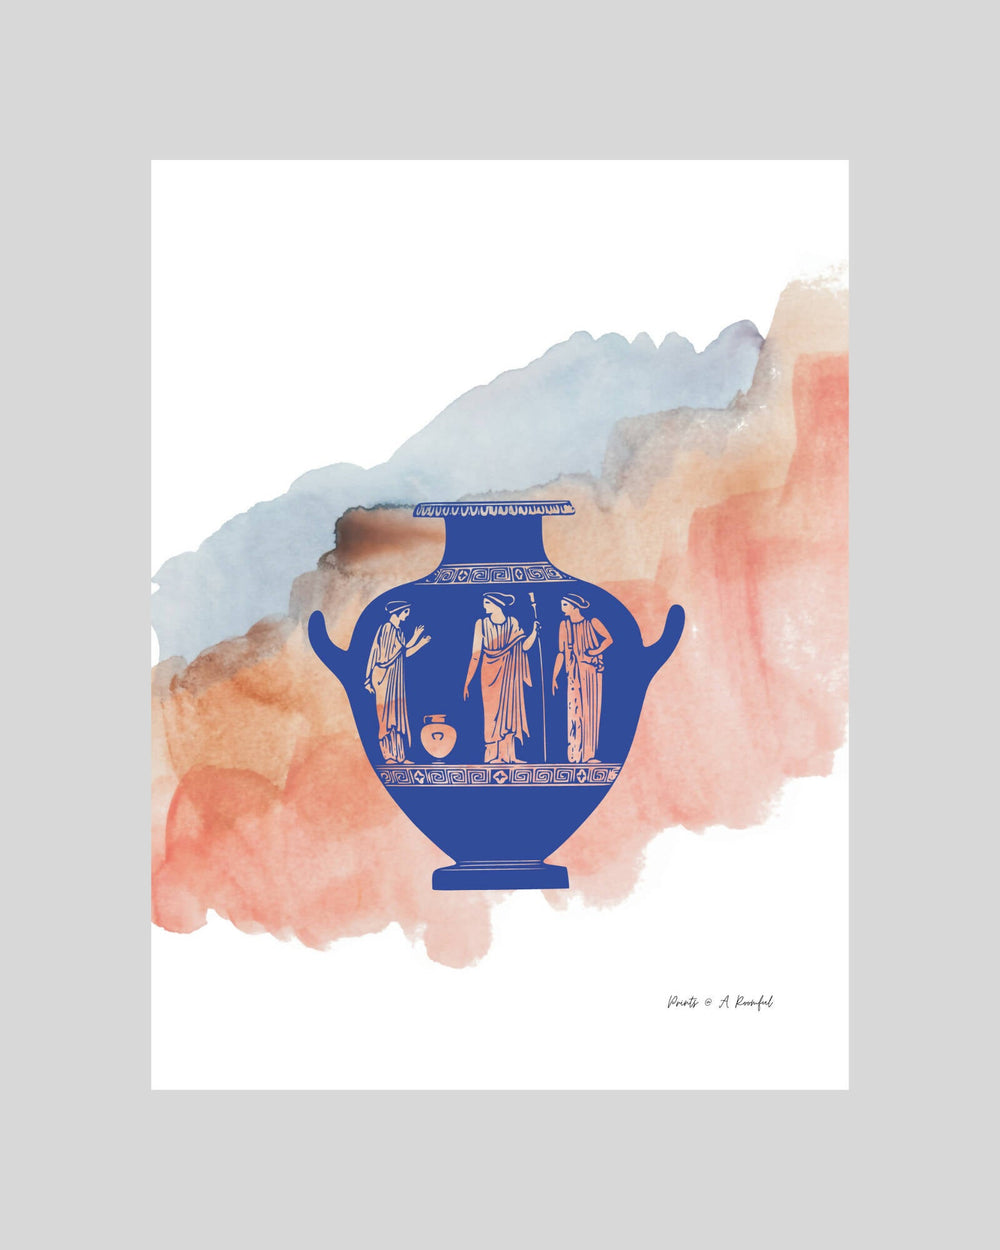 wall art : inspired by pottery and clay (greek pottery) Art Prints@ARoomful 